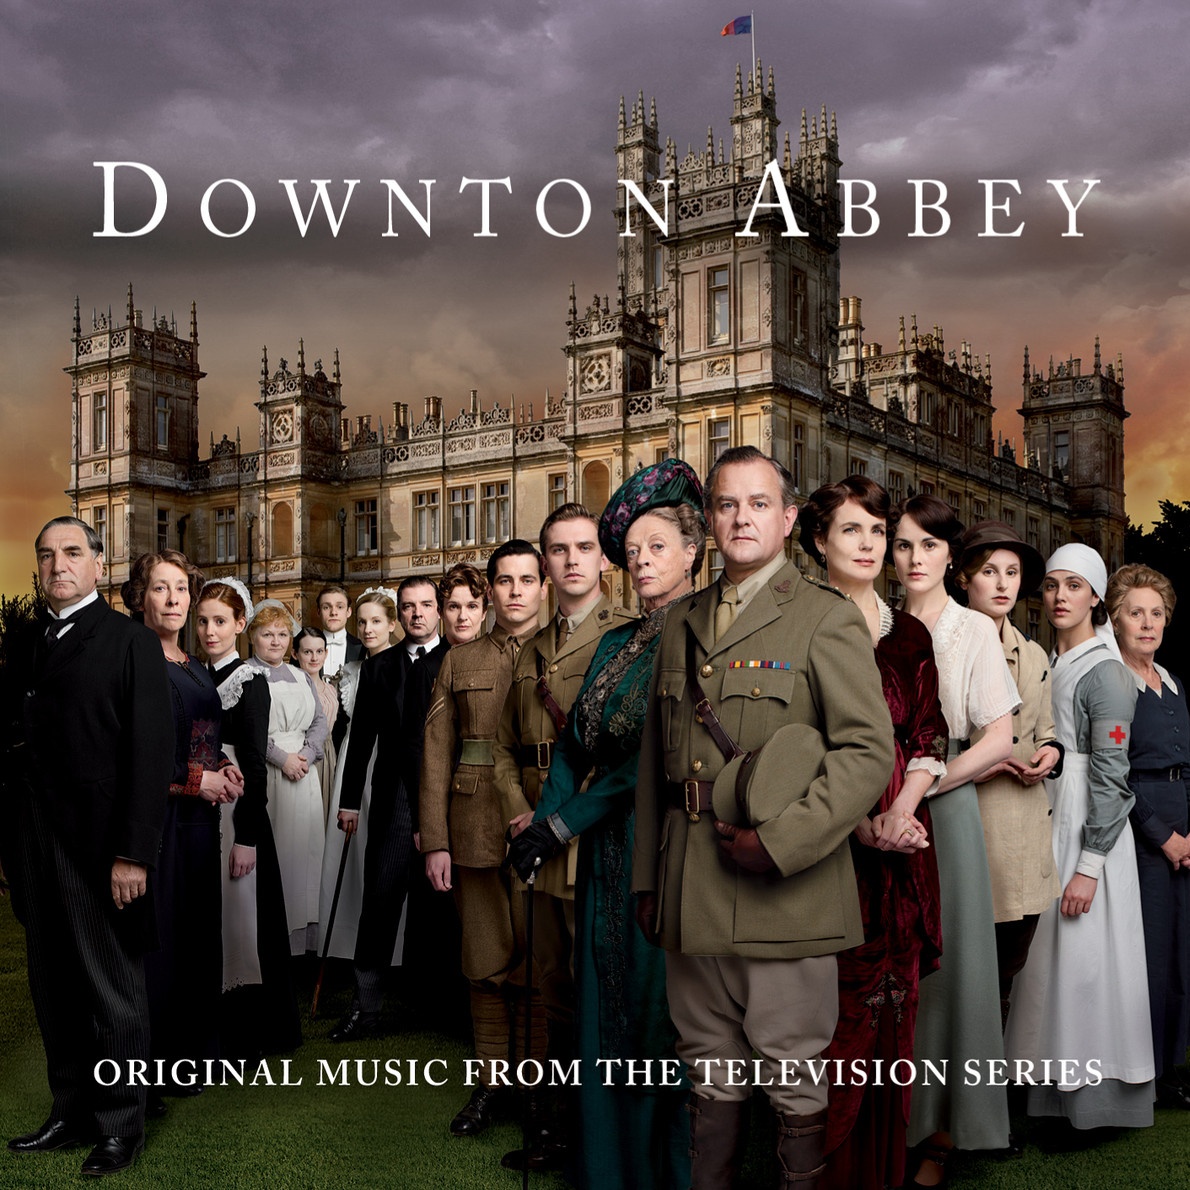 Downton Abbey (Original Music from the Television Series)